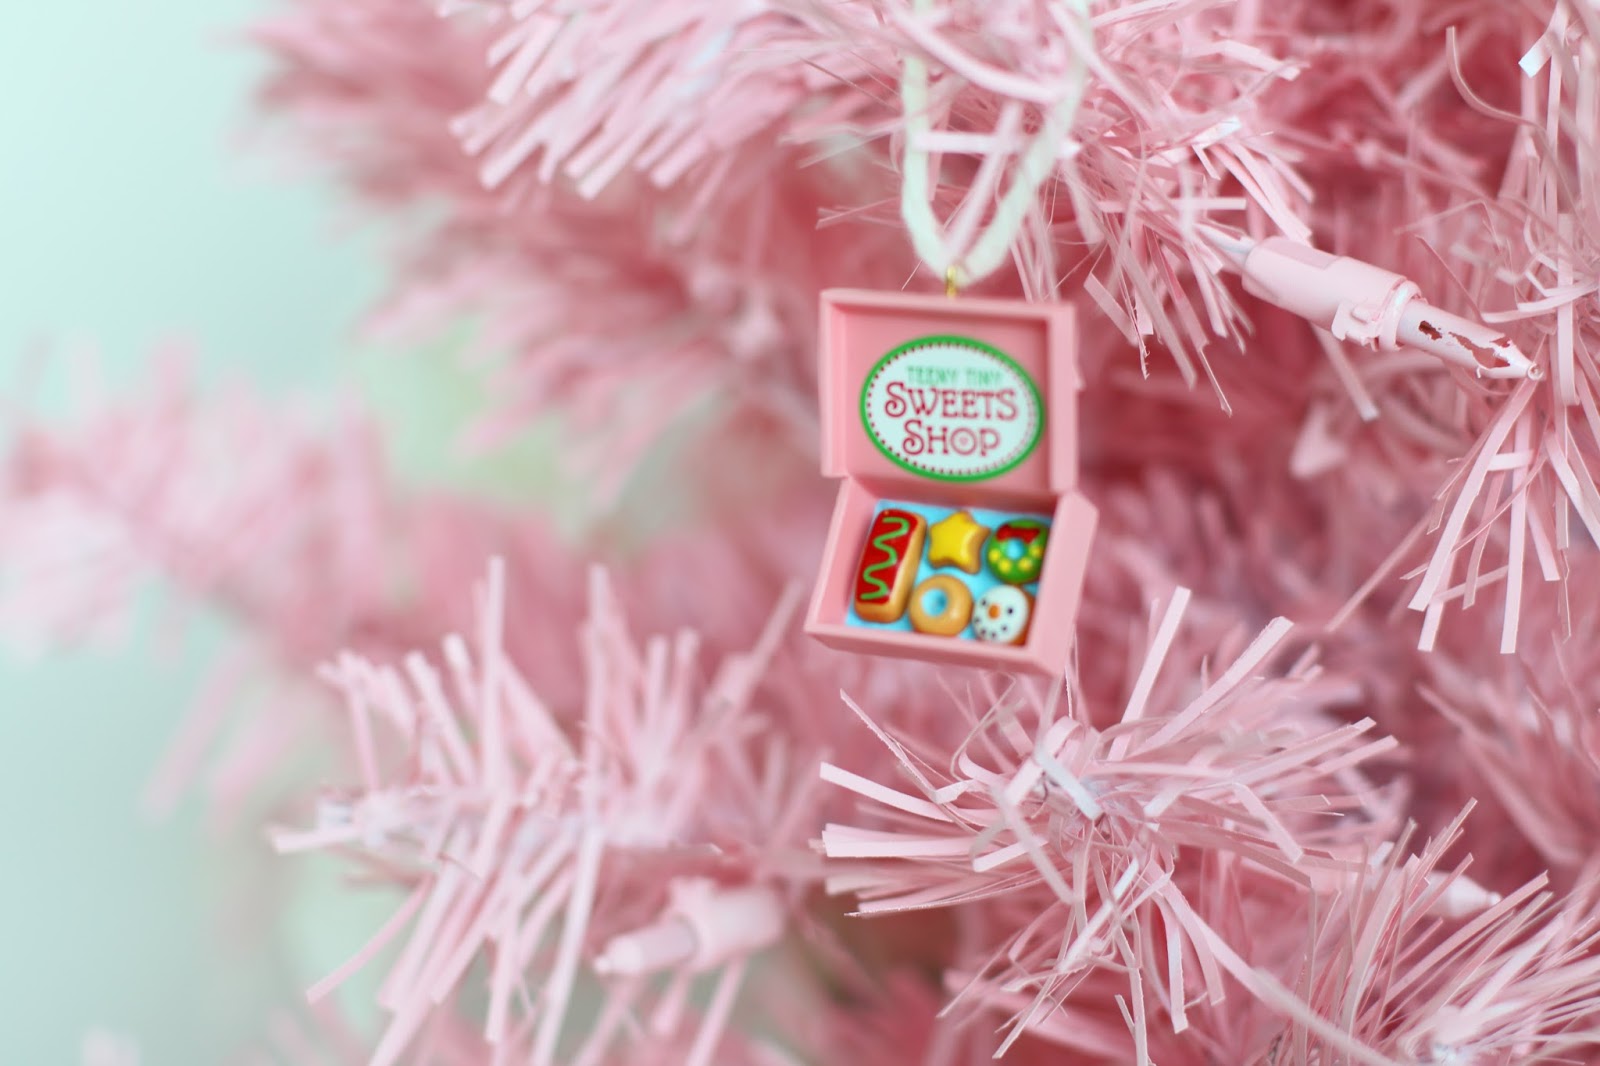 Use spray paint on a white tree to create this pink Christmas tree!